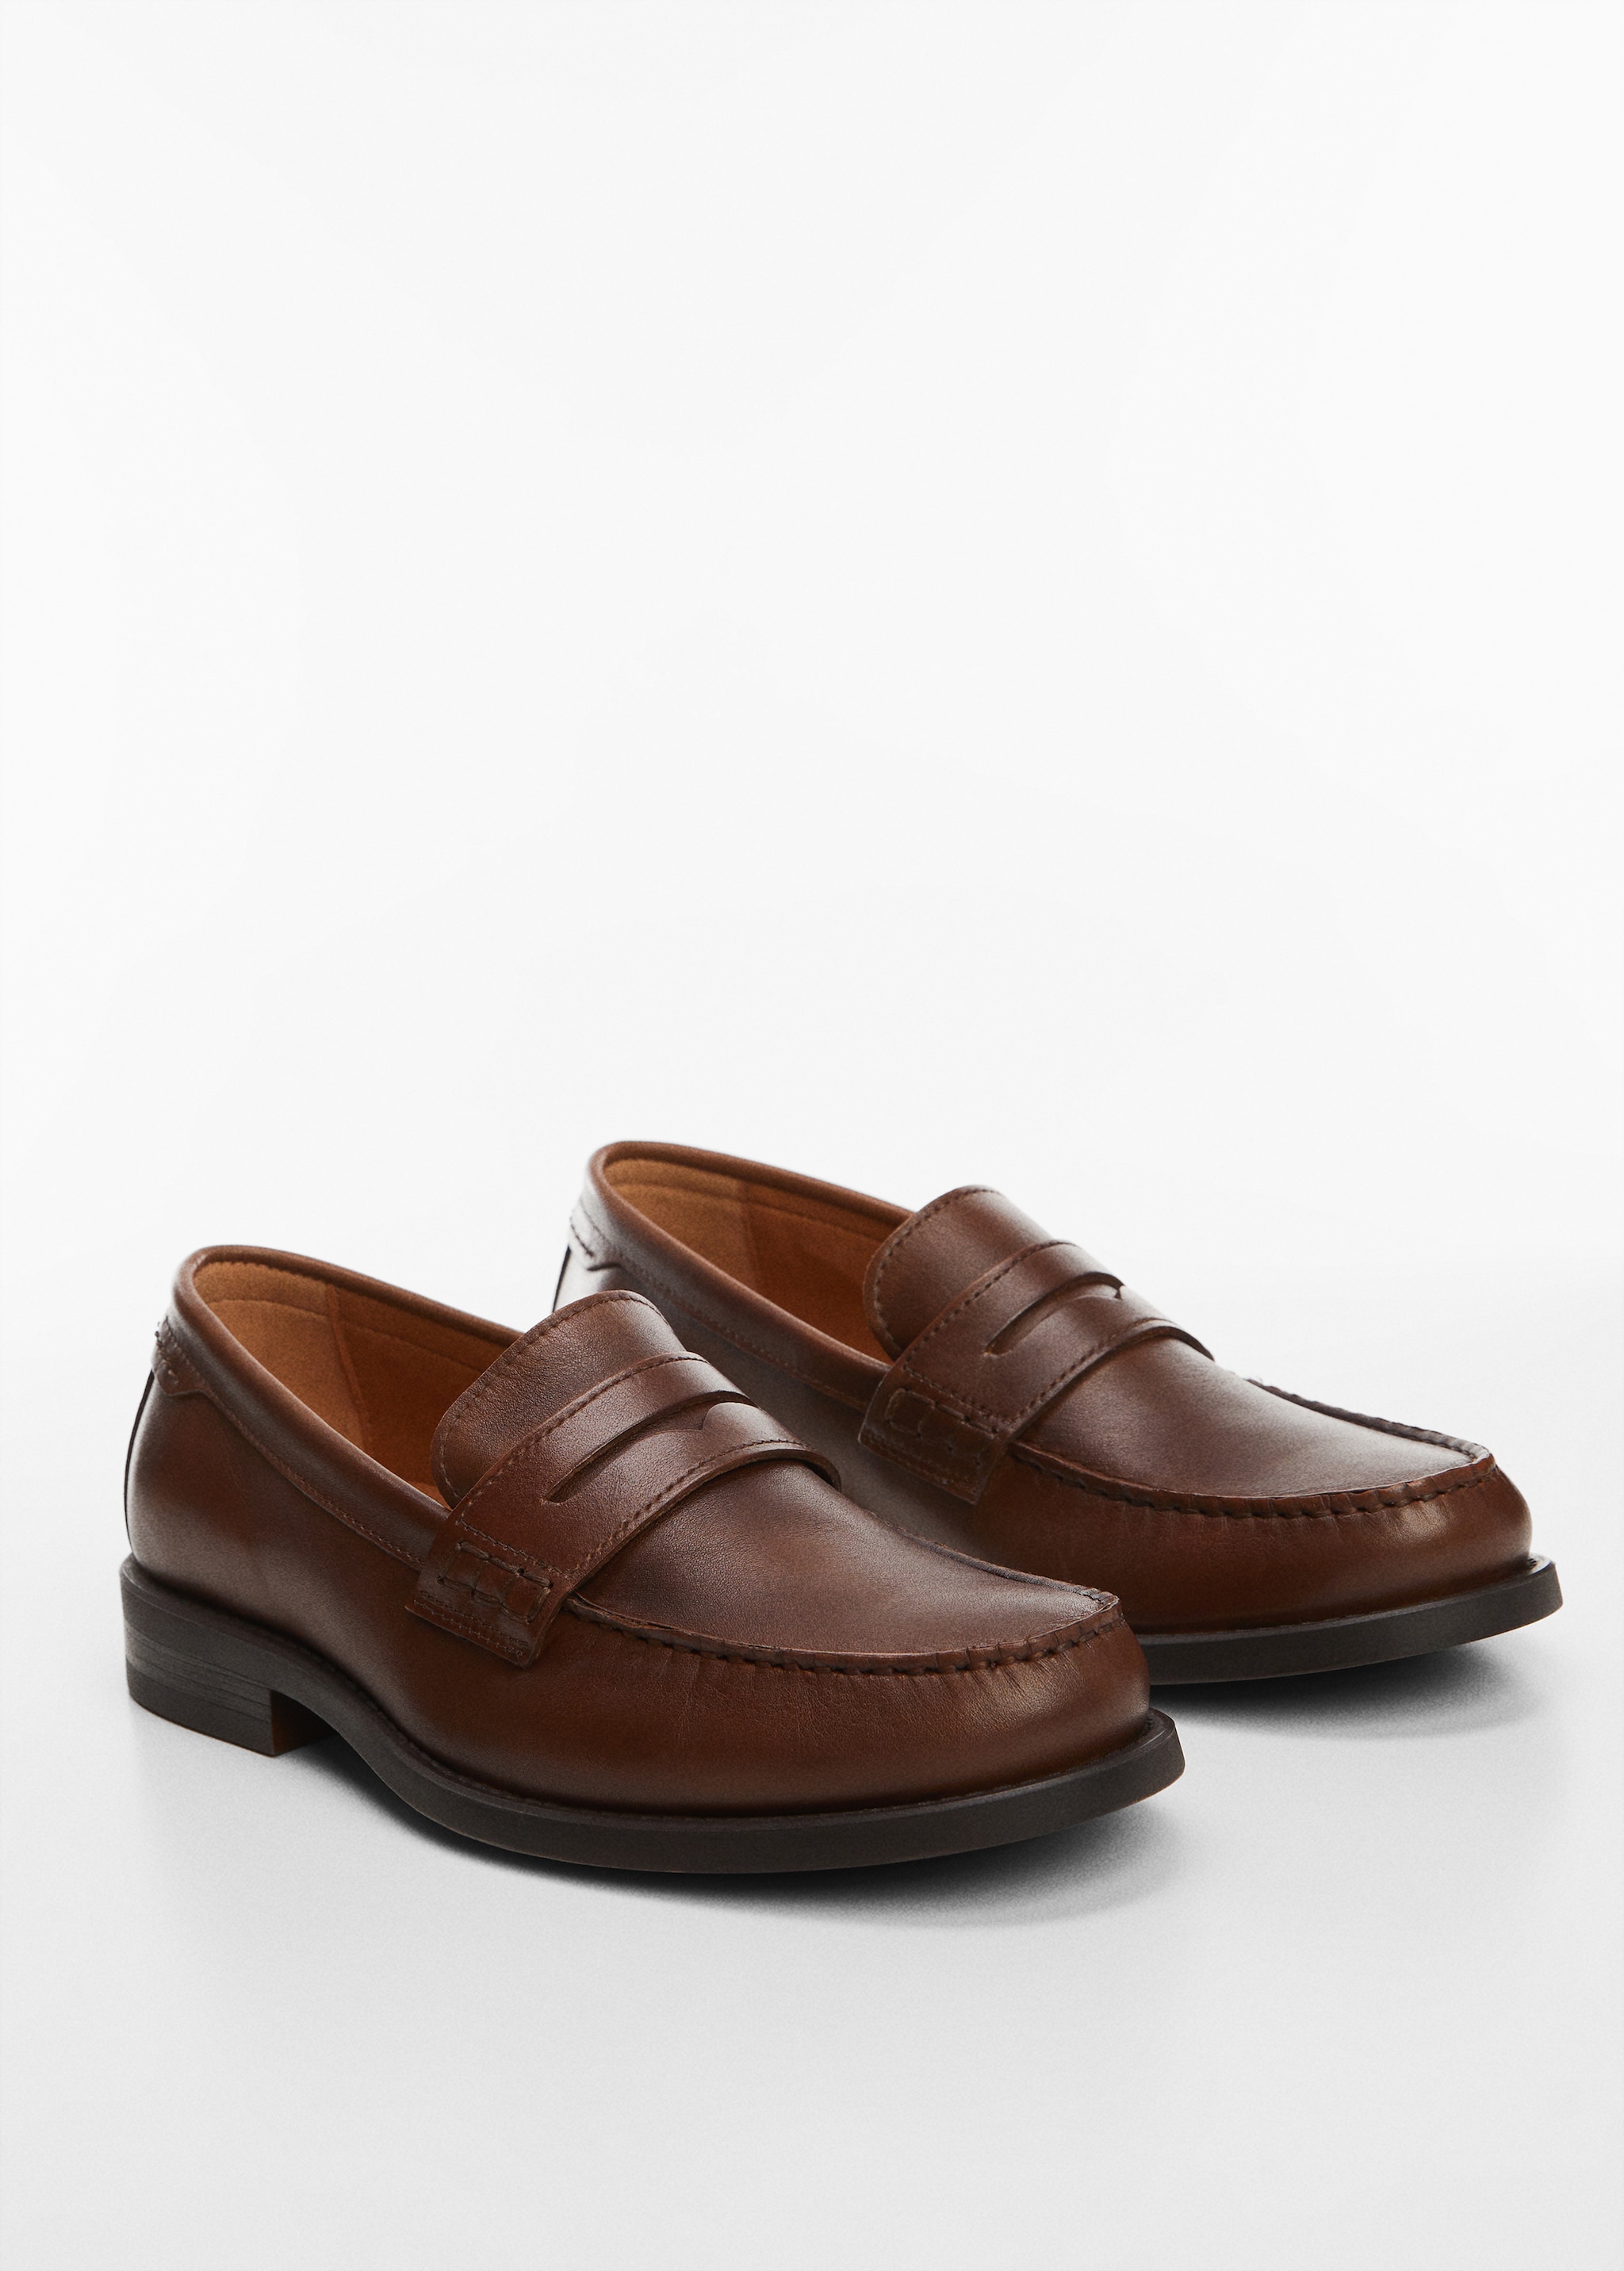 Leather penny loafers - Medium plane